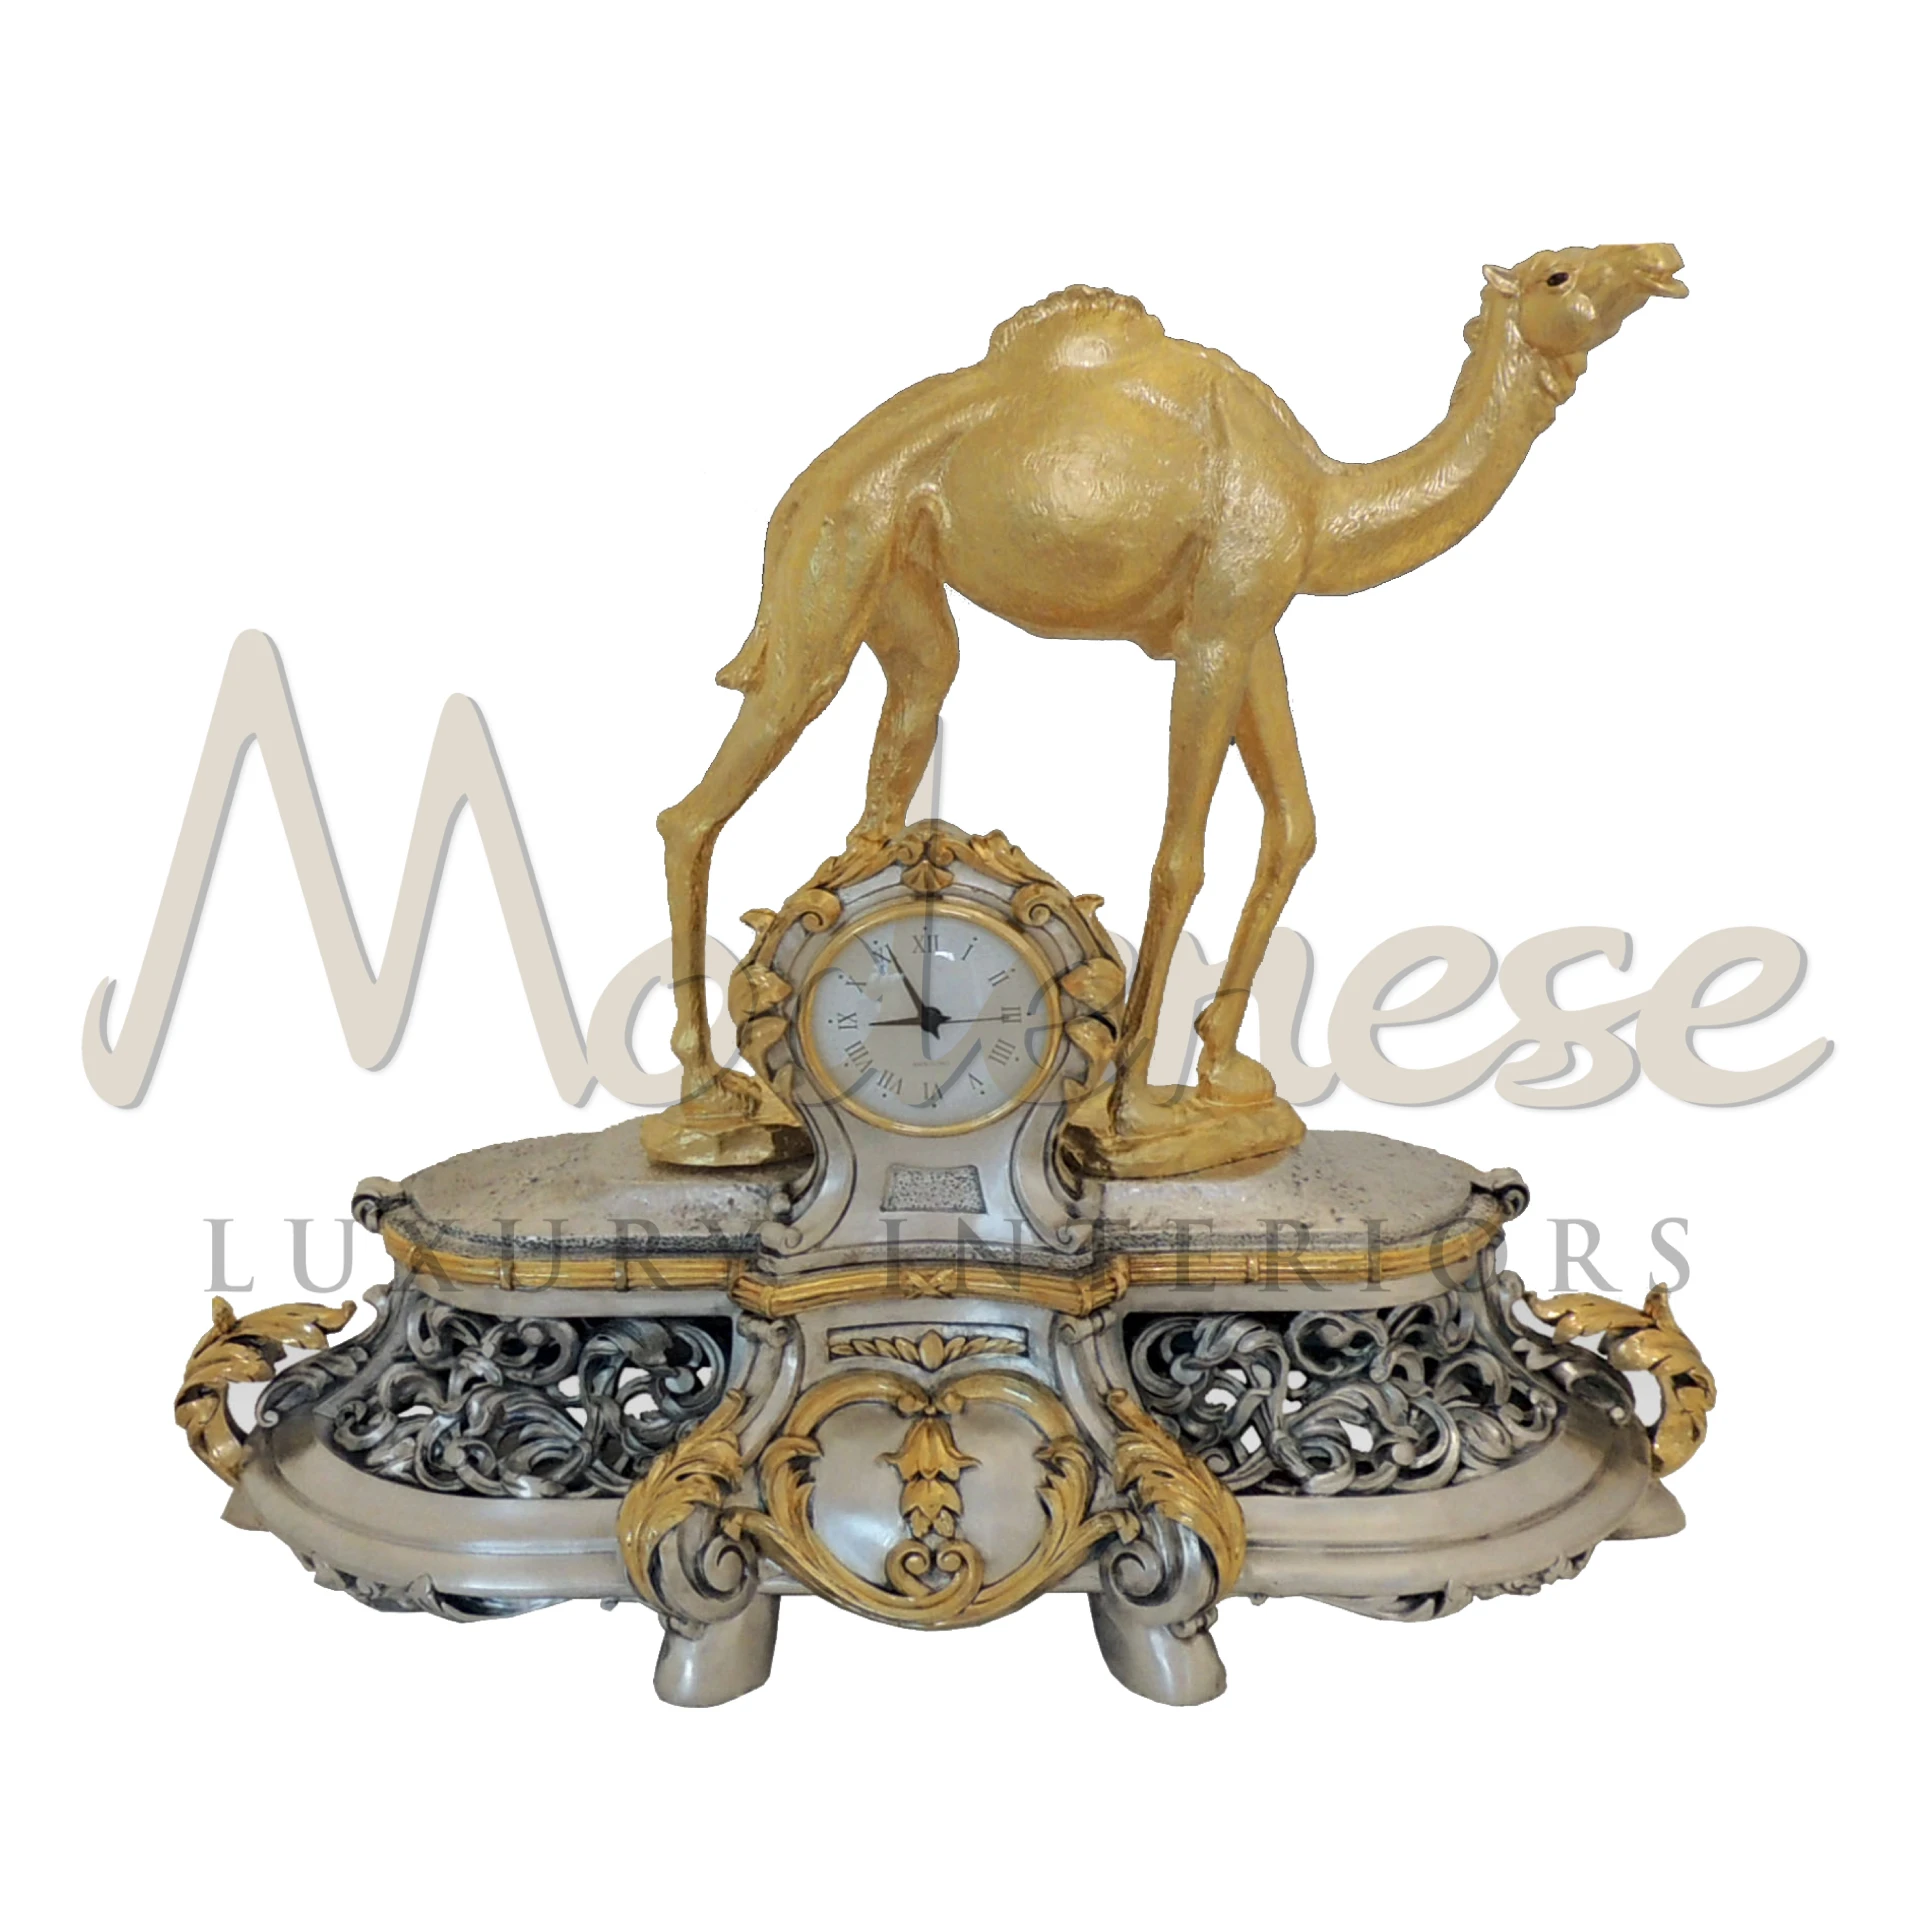 Traditional Camel Table Clock, elegantly crafted in metal or wood, merging functionality with classic design, ideal for adding a unique touch to decor.






